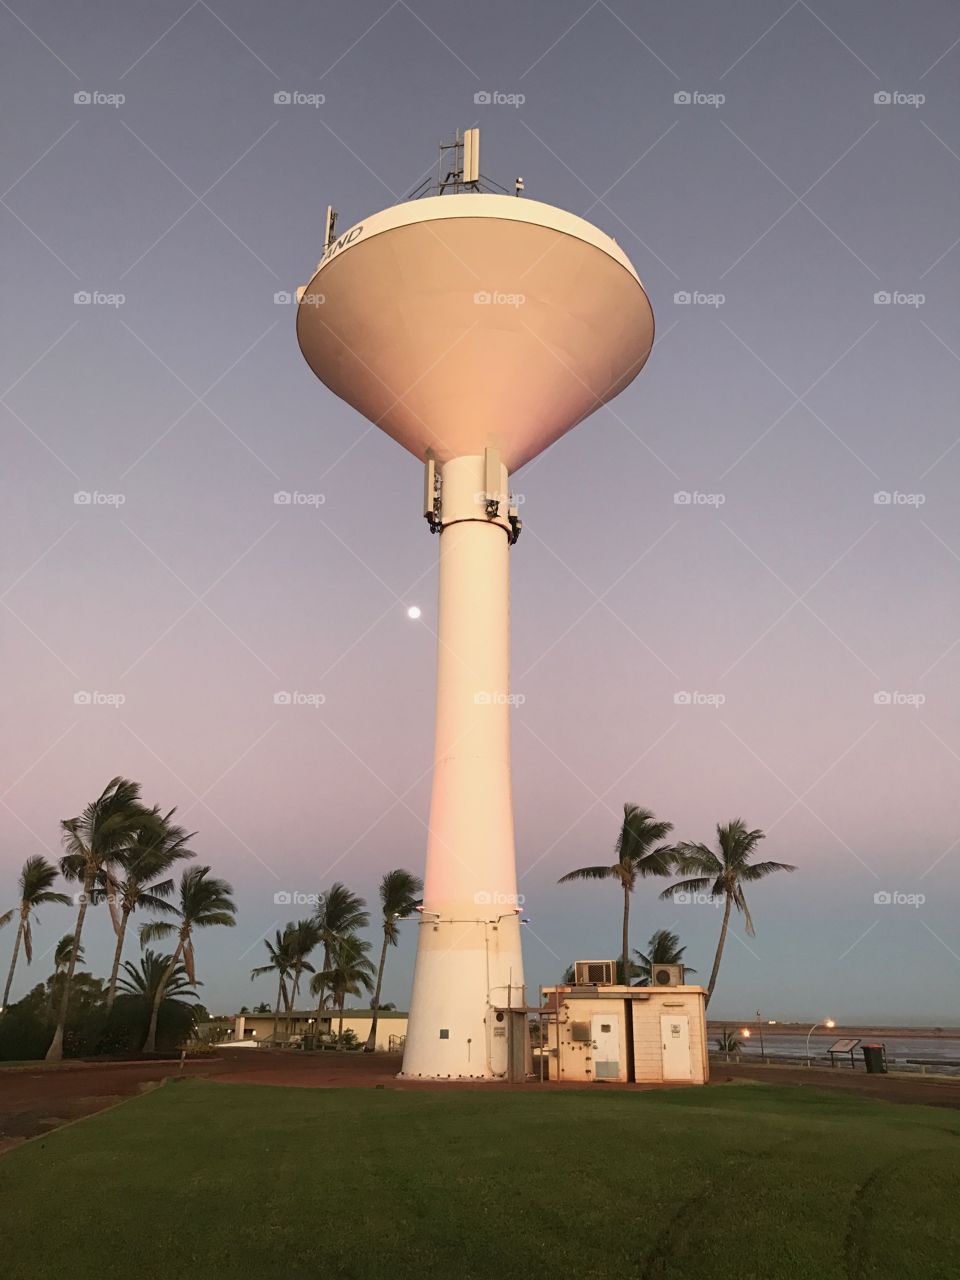 Moon setting beside water tower with palm trees